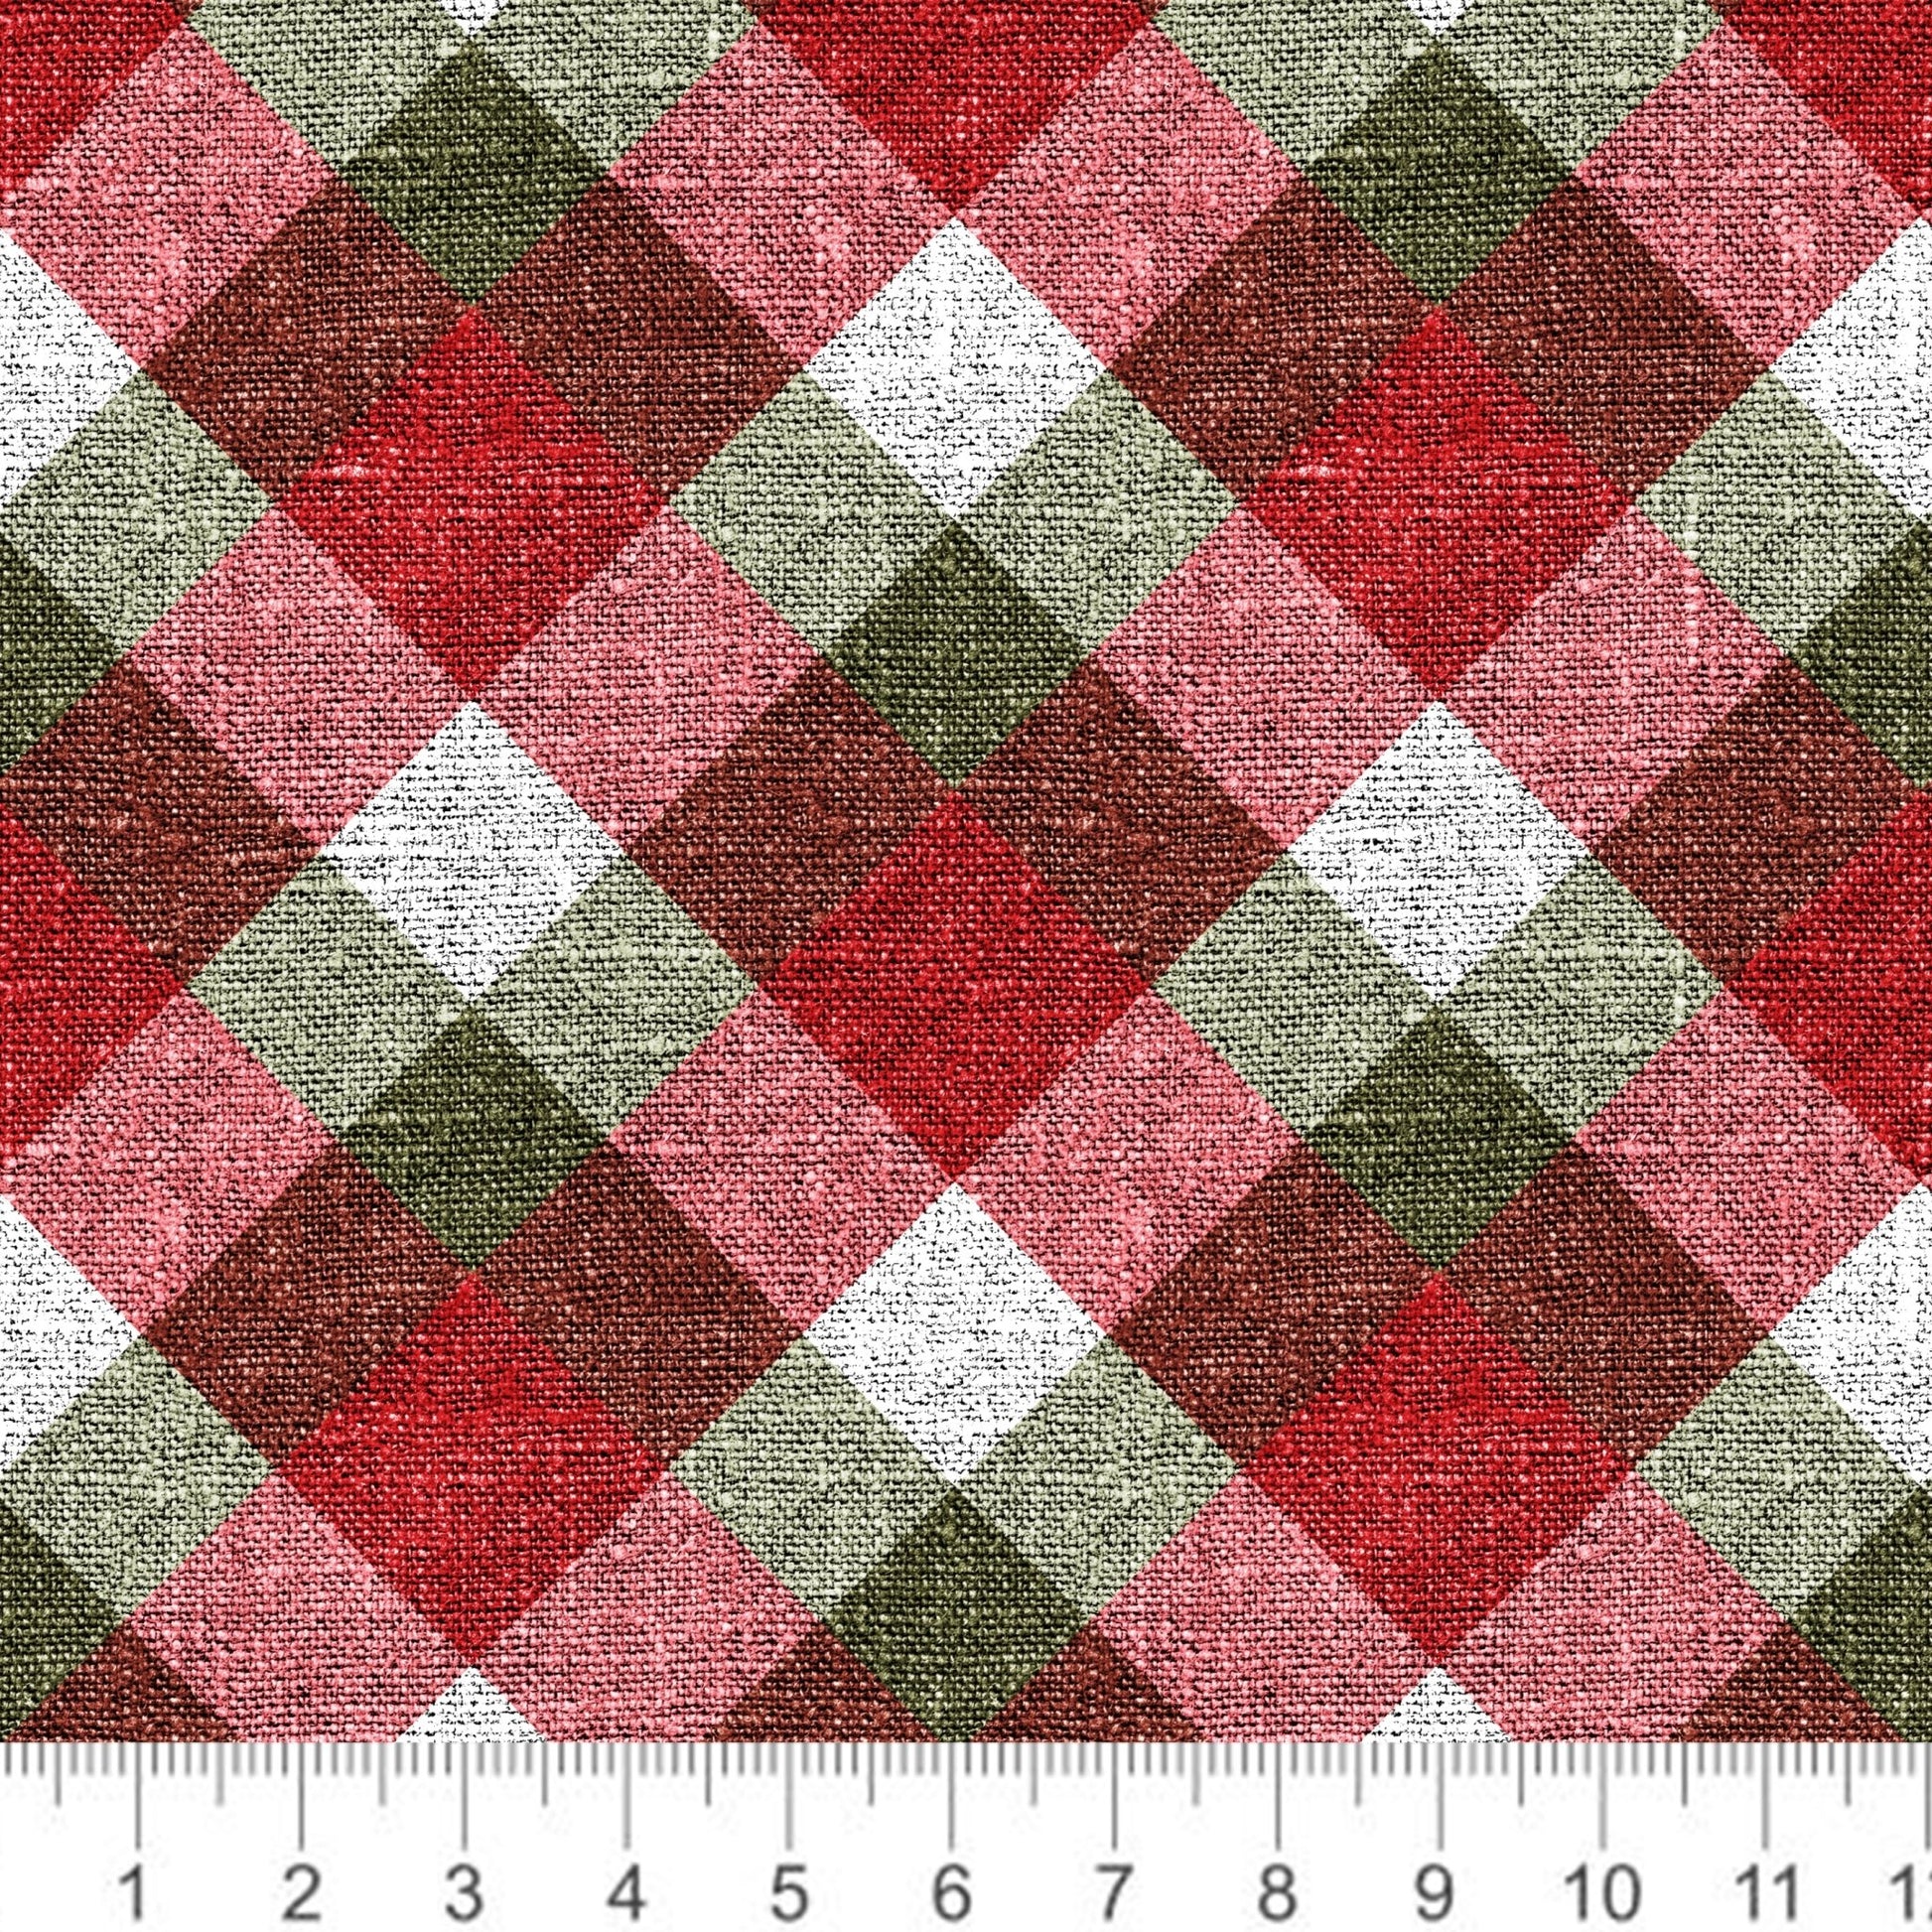 Raspberry Pattern Co - Christmas Plaid - Red and Green - Faux Linen - Little Rhody Sewing Co.